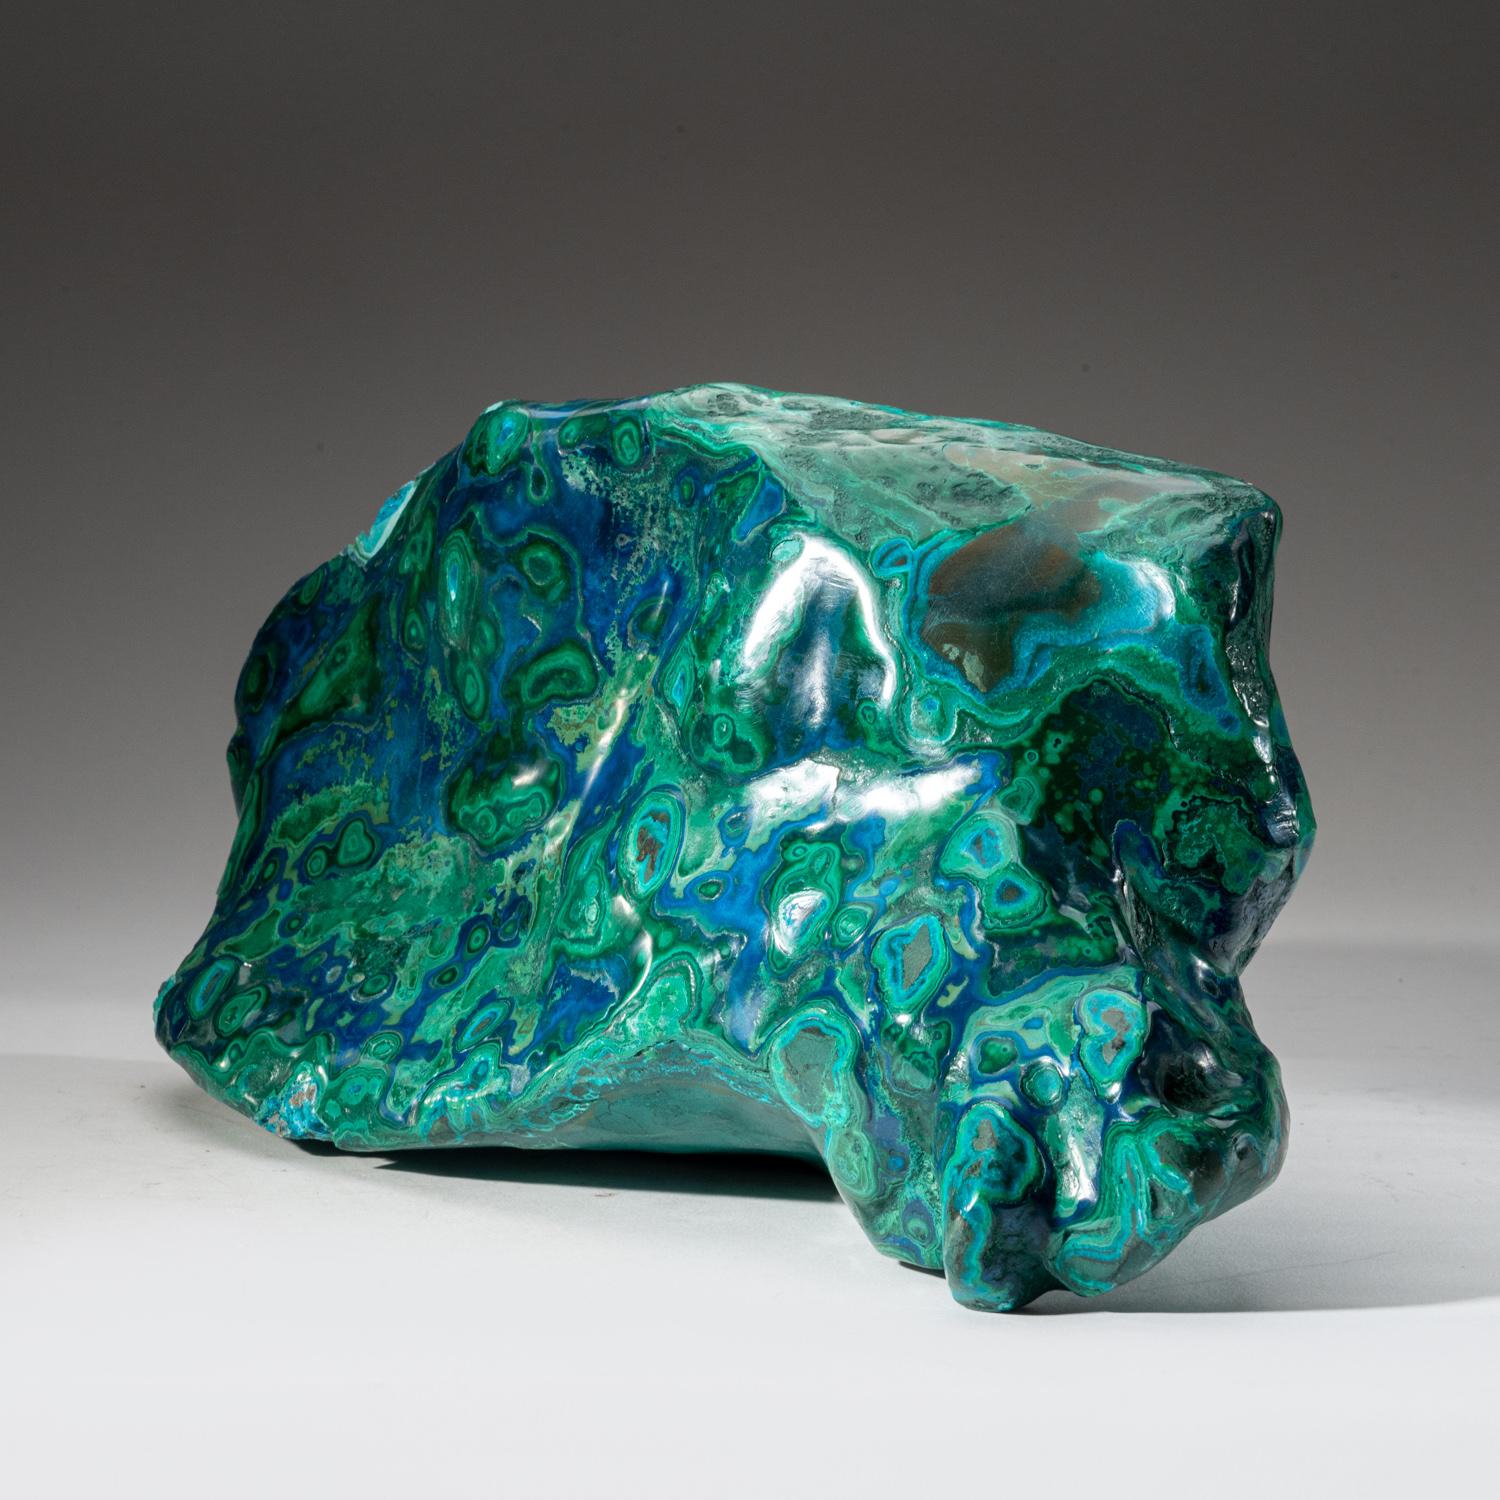 This large, museum-quality piece of freeform Bulls-eye Malachite with Blue Azurite, is hand-polished and sourced from Zaire. This collectors specimen is a rare combination of the two mineral types. This piece has well defined banded concentric